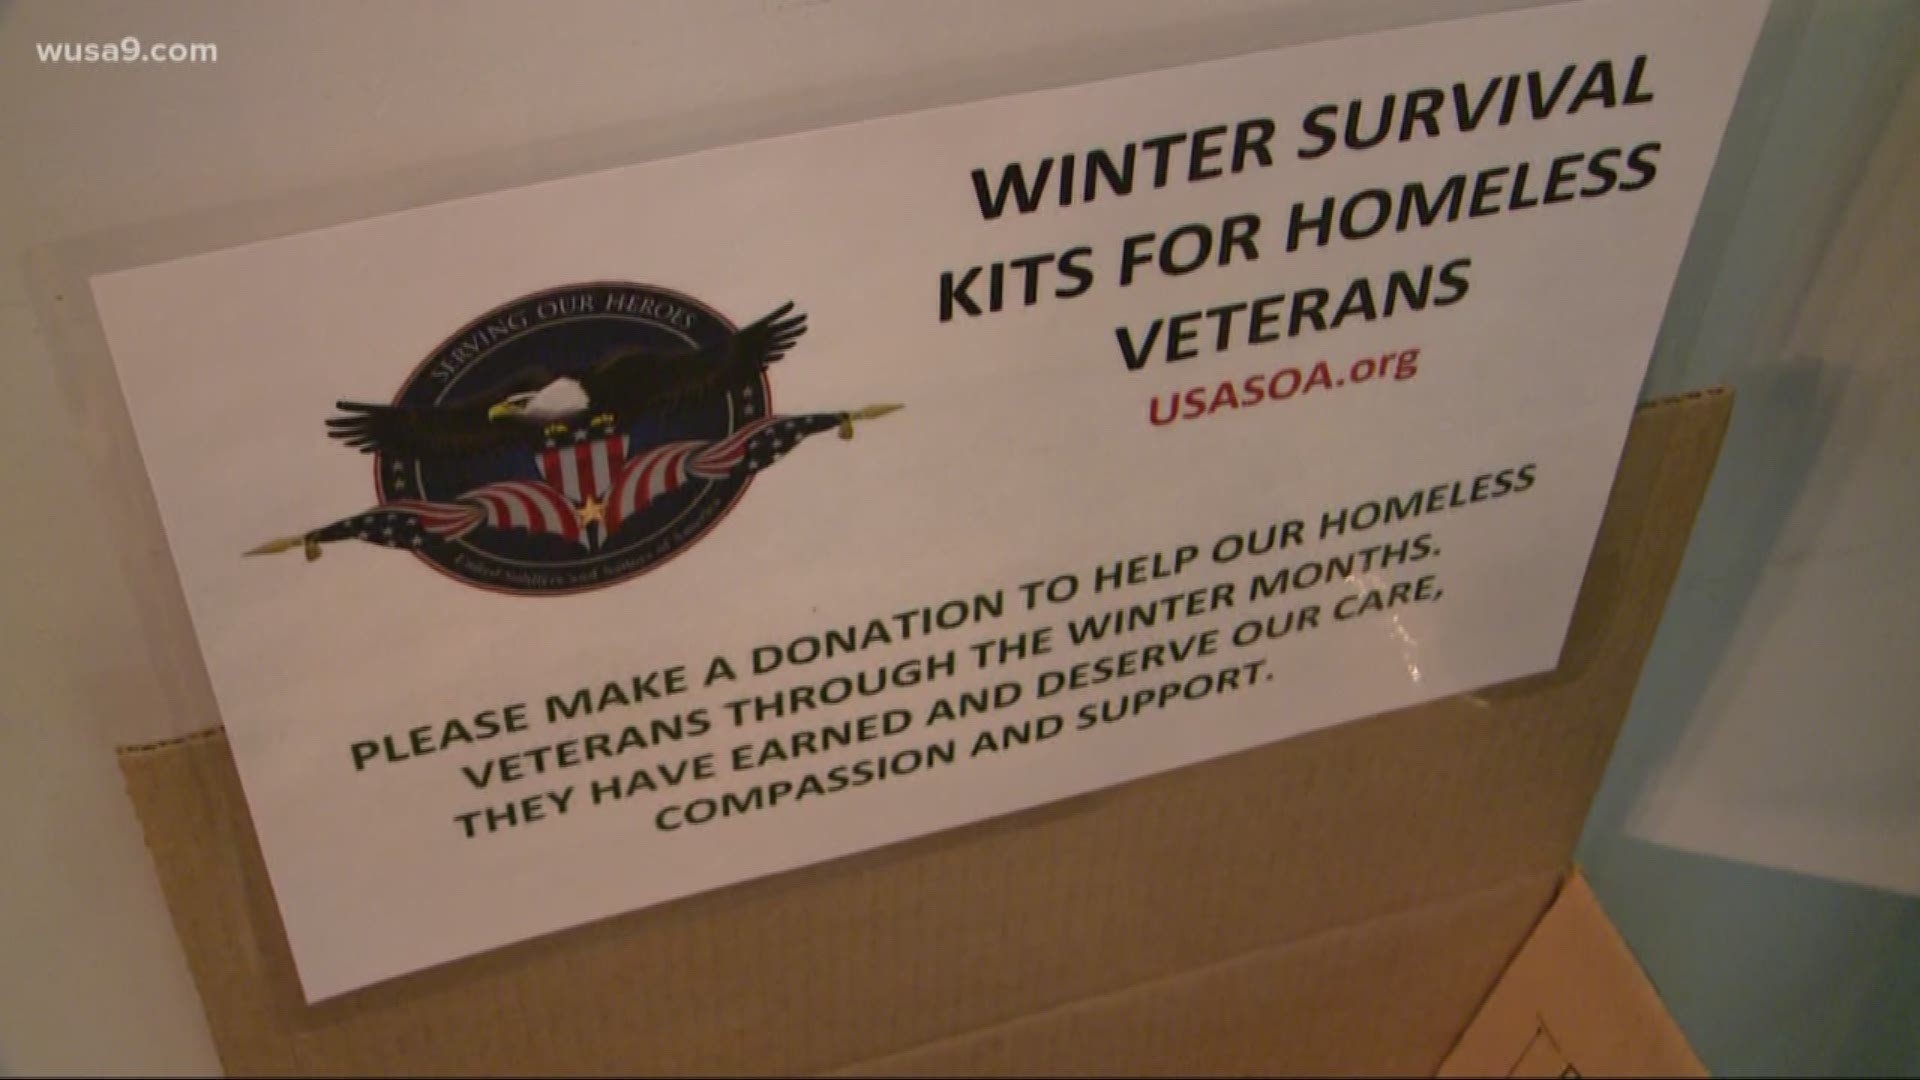 The USASOA made more than 250 Winter Survival Kits for homeless veterans in 2018. This year, they want your help to double that number.